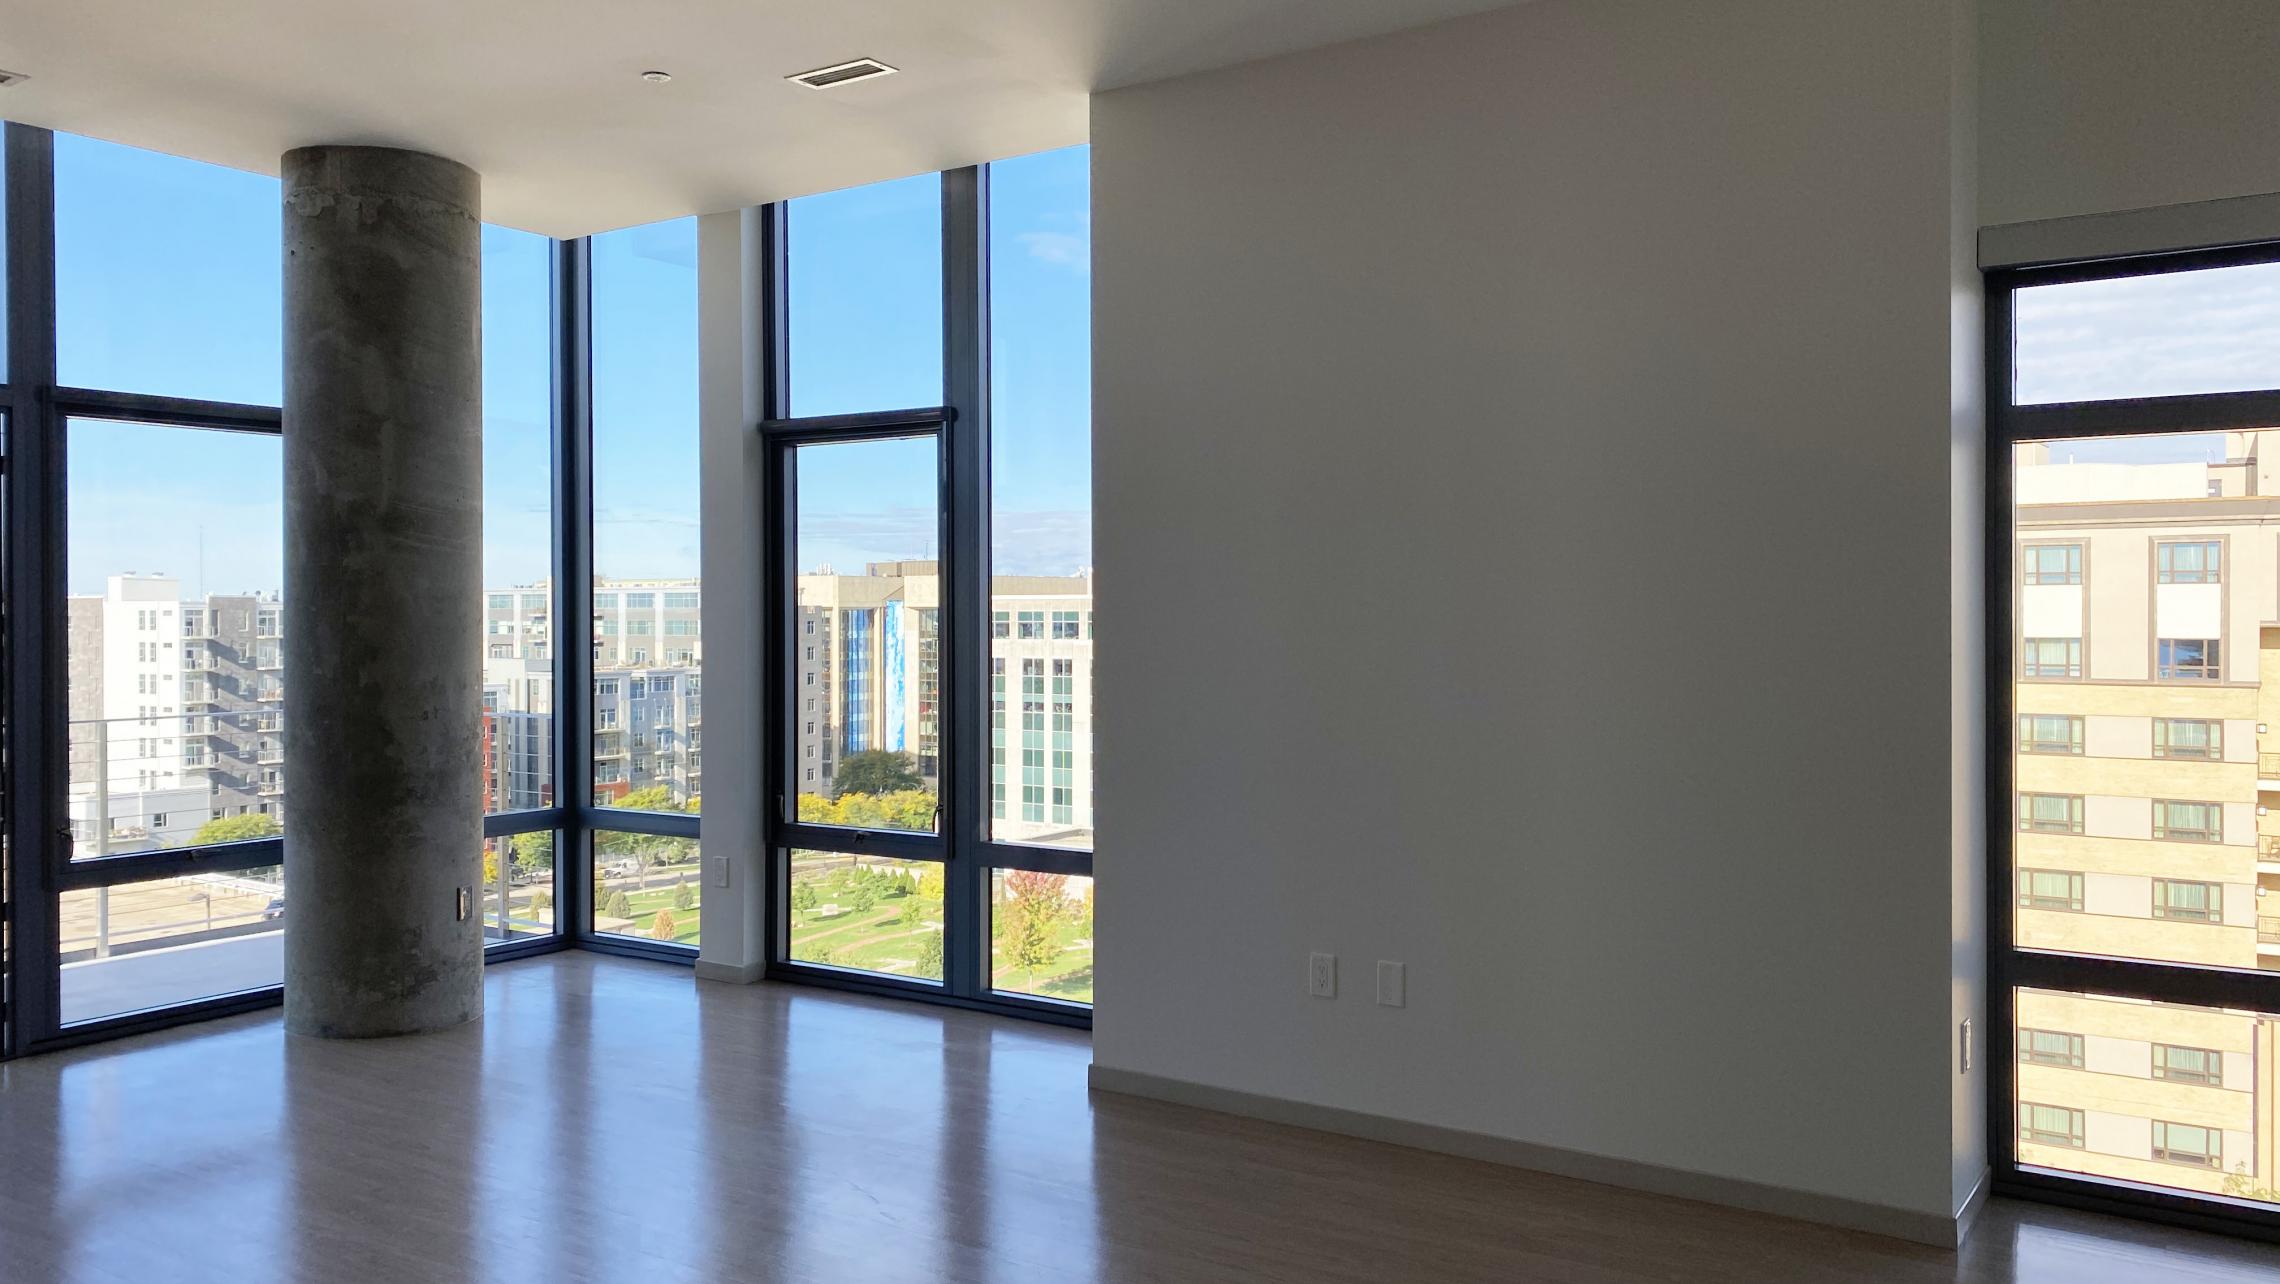 The-Pressman-Apartments-Two-Bedroom-912-Modern-Upscale-Luxury-Top-Floor-Capitol-Lake-View-Balcony-Corner-Lifestyle-Downtown-Madison-Design-Concrete-Kithcen-Living-Dining-Windows-Dogs-Cats-Pets-Fitness-Lounge